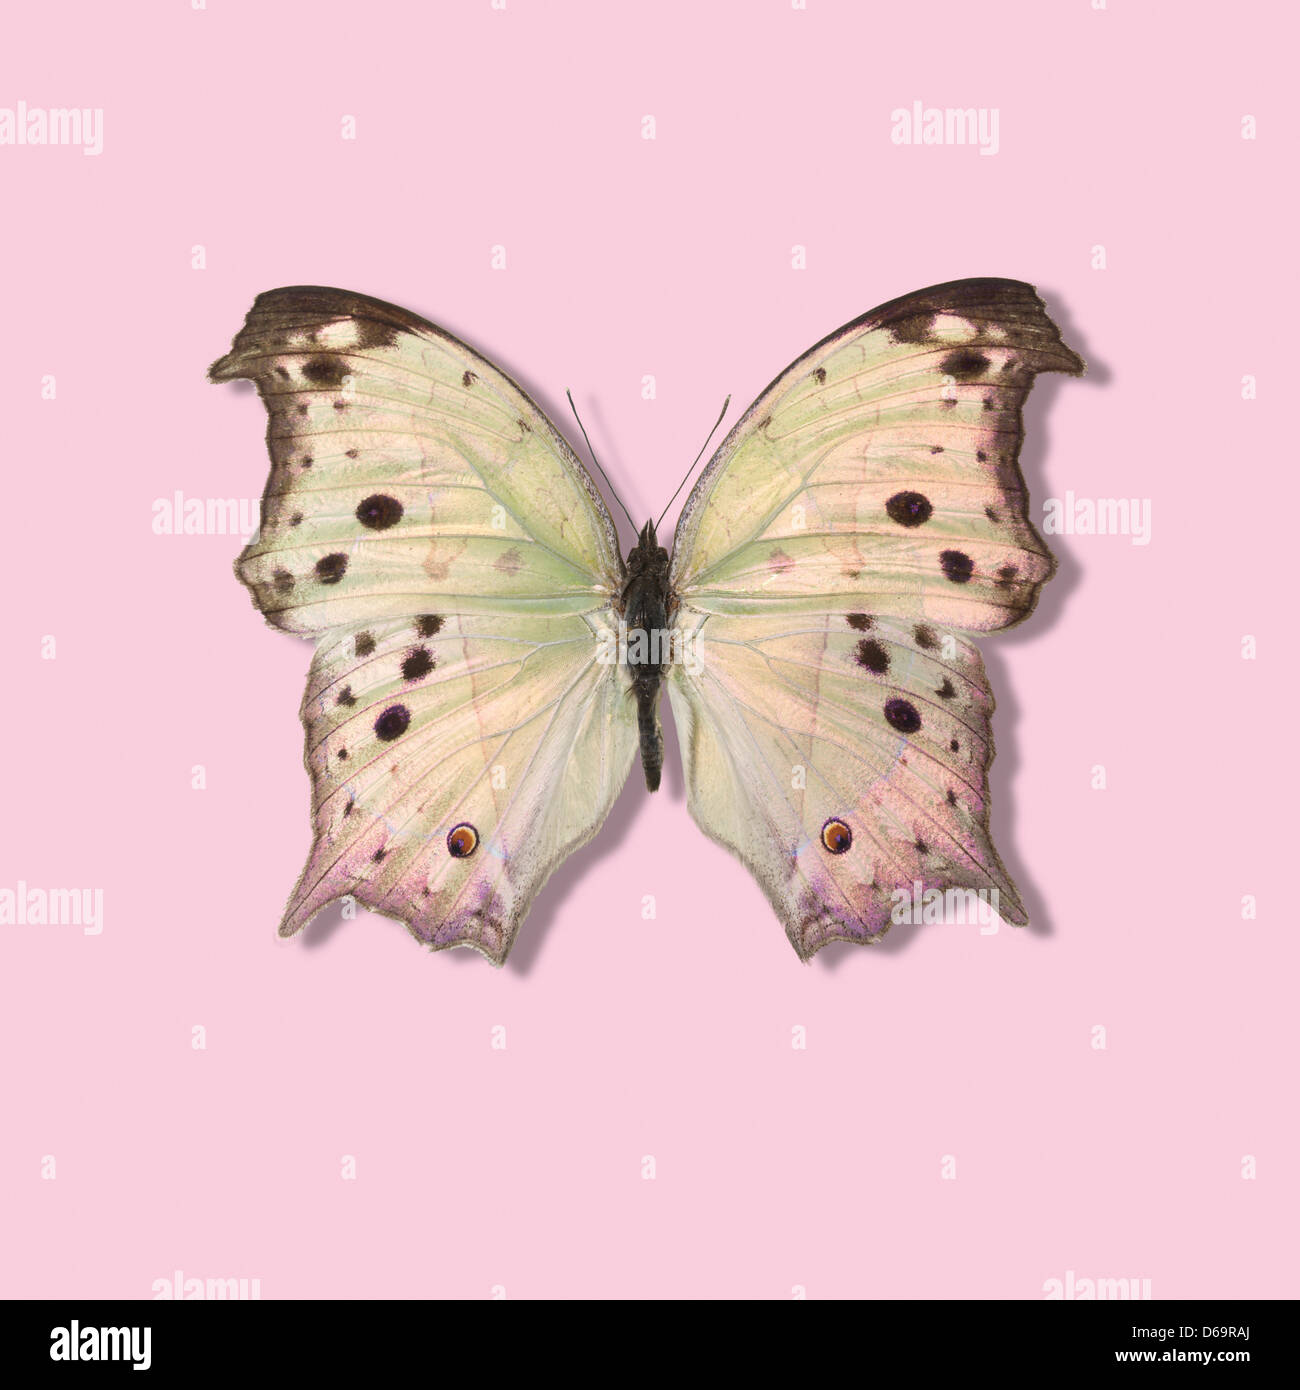 Close up taxidermied butterfly Foto Stock